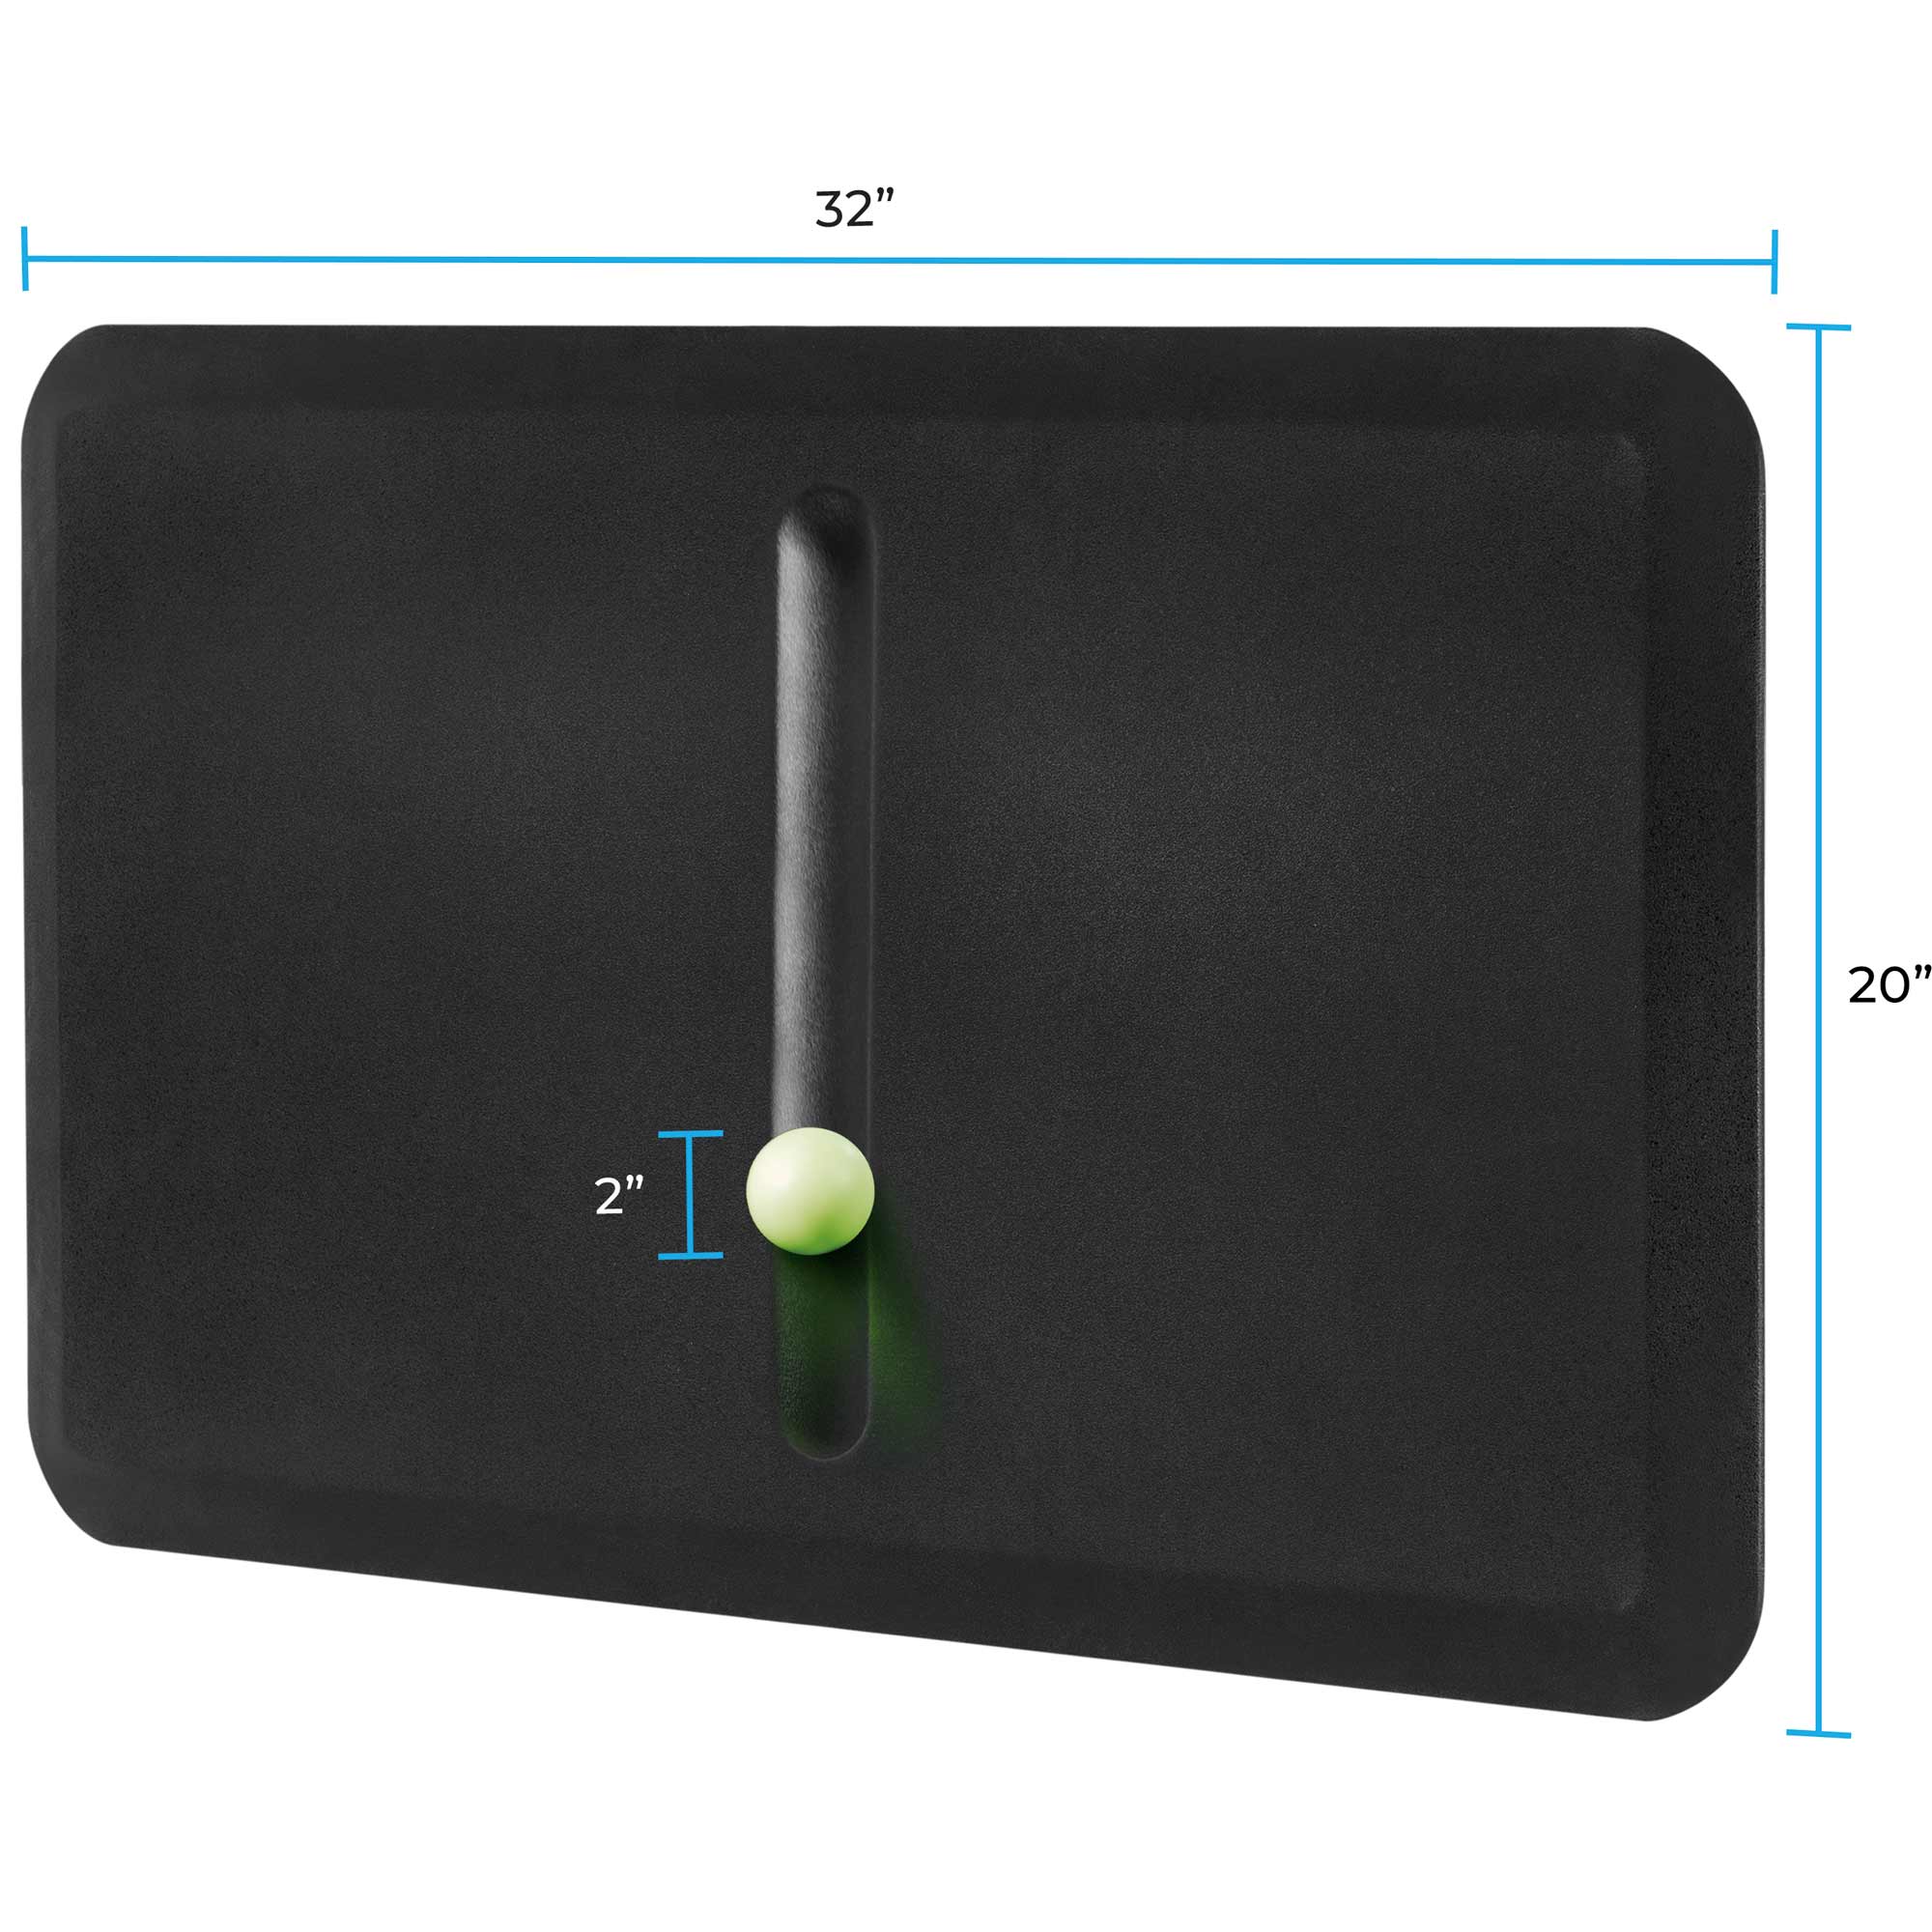 https://cdn.accentuate.io/40875150573725/1630593269169/Web_Standing-Mat_32x20_Medium-with-Massaage-Ball_Black_MTMB32BL_Stand-Steady_PDP_Specifications2-(1).jpg?v=0